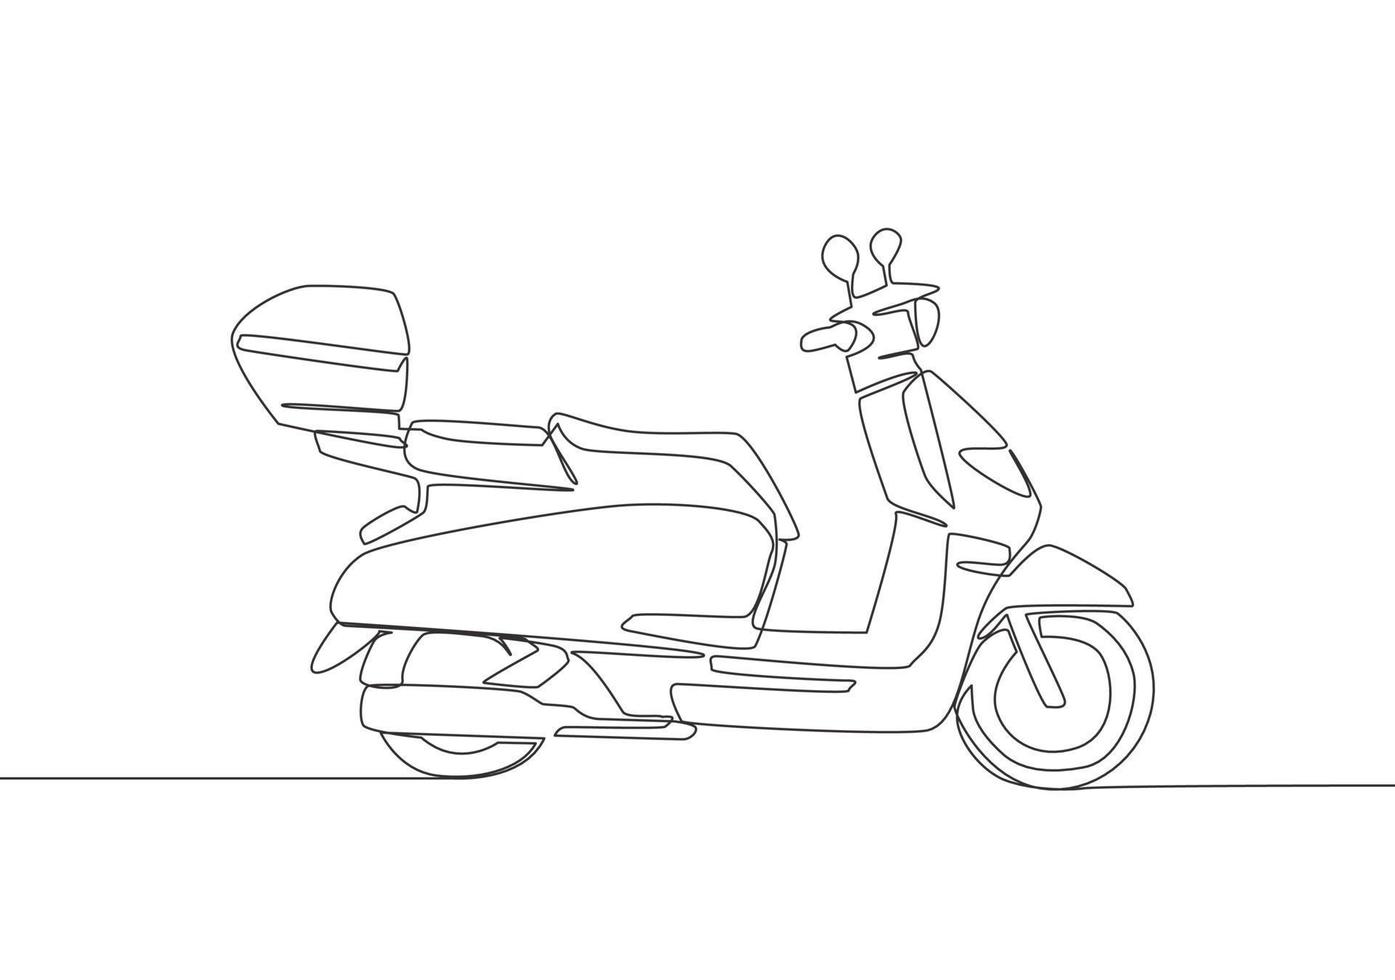 One single line drawing of courier delivery service motorbike logo. Scooter motorcycle concept. Continuous line draw design vector illustration